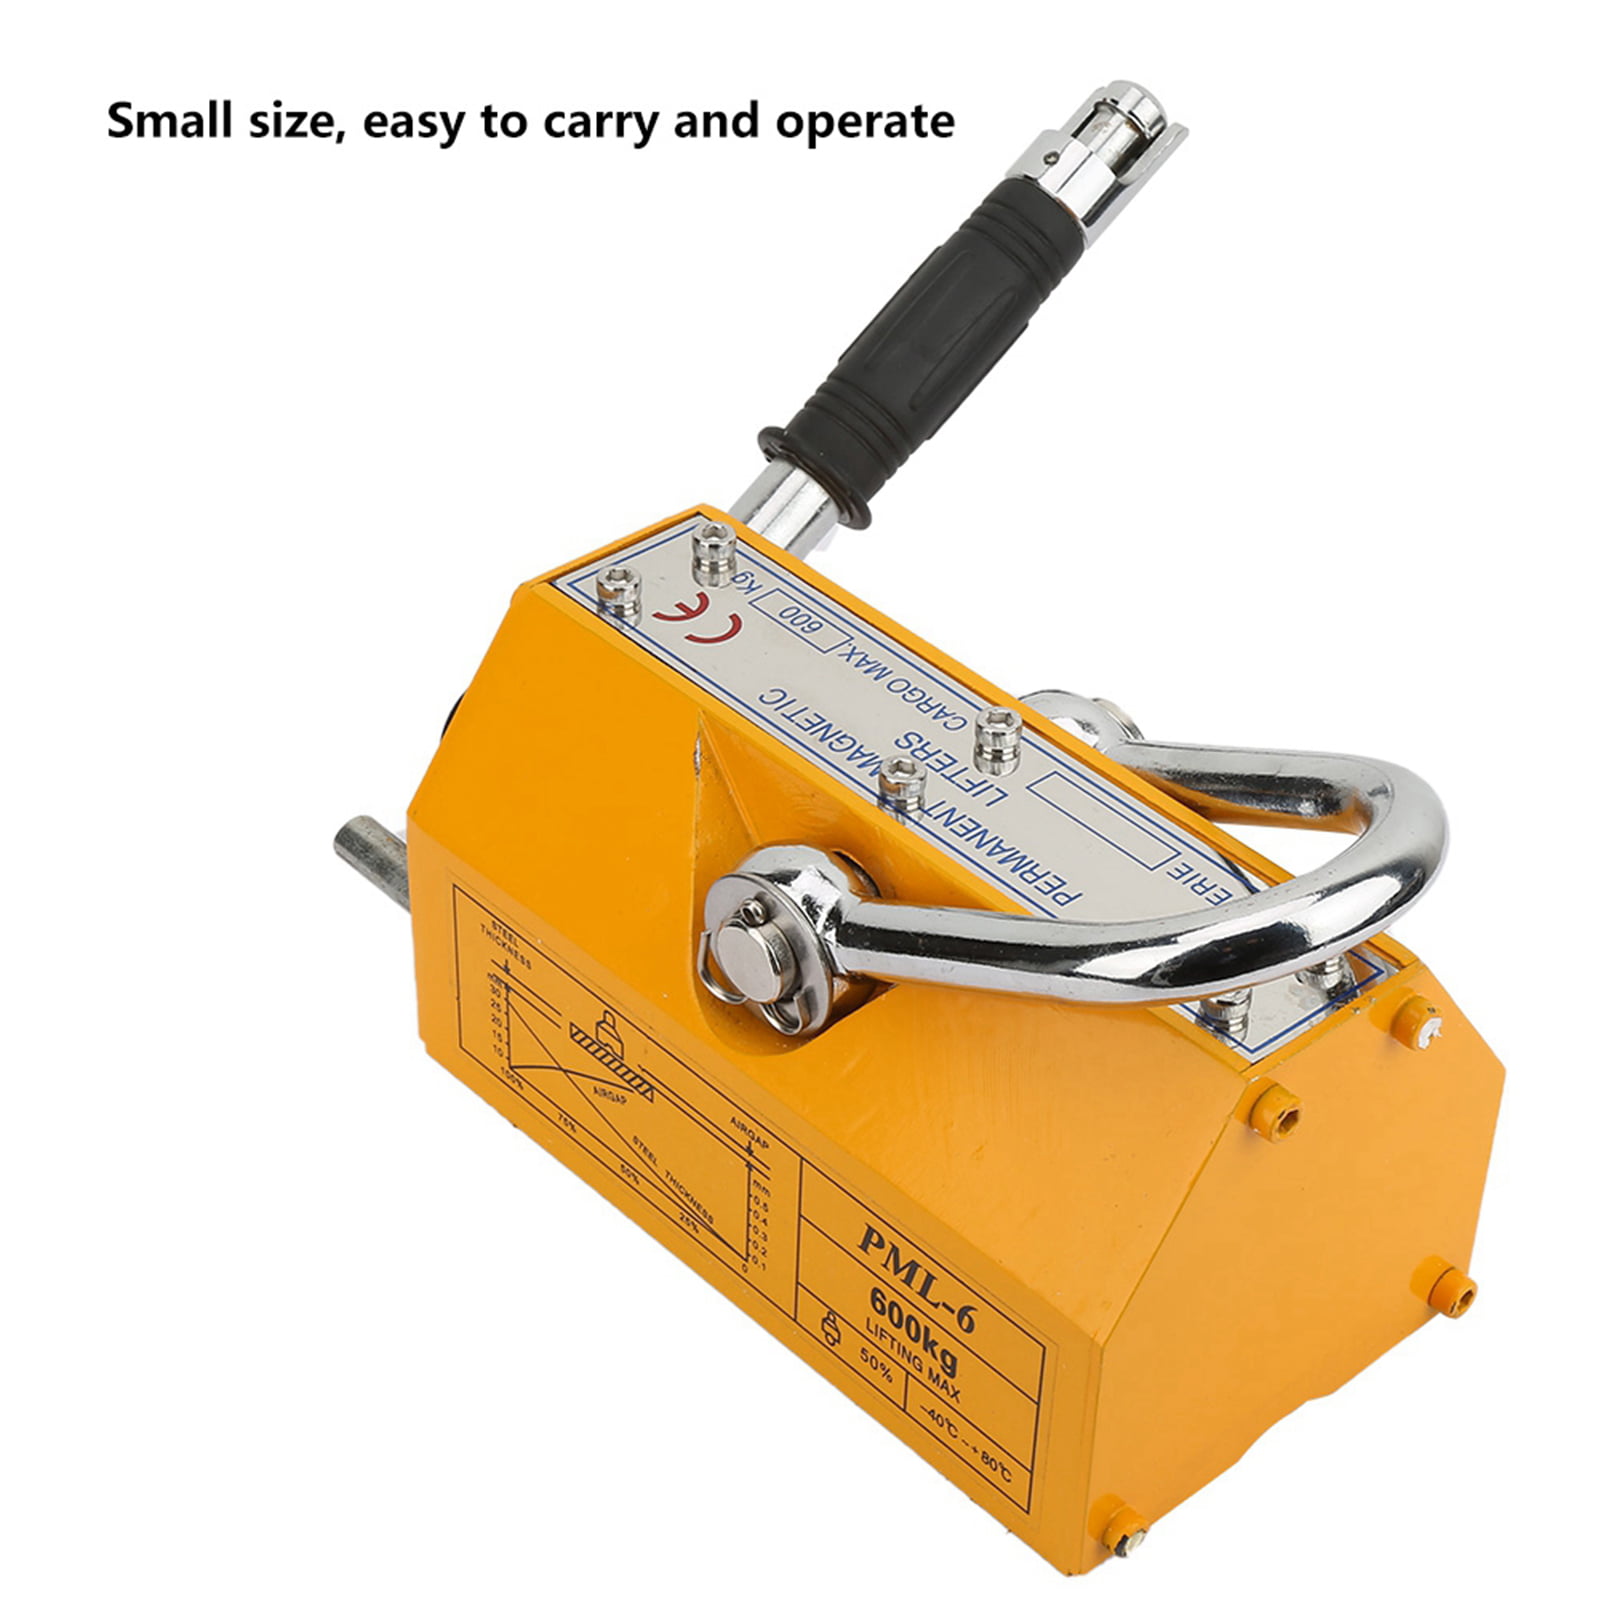 600KG Permanent Magnet Crane Portable Crane Magnetic Lifting Tool Durable Magnetic Lifter for Handling Steel Plates Used In Factories Transportation Industries Terminals 